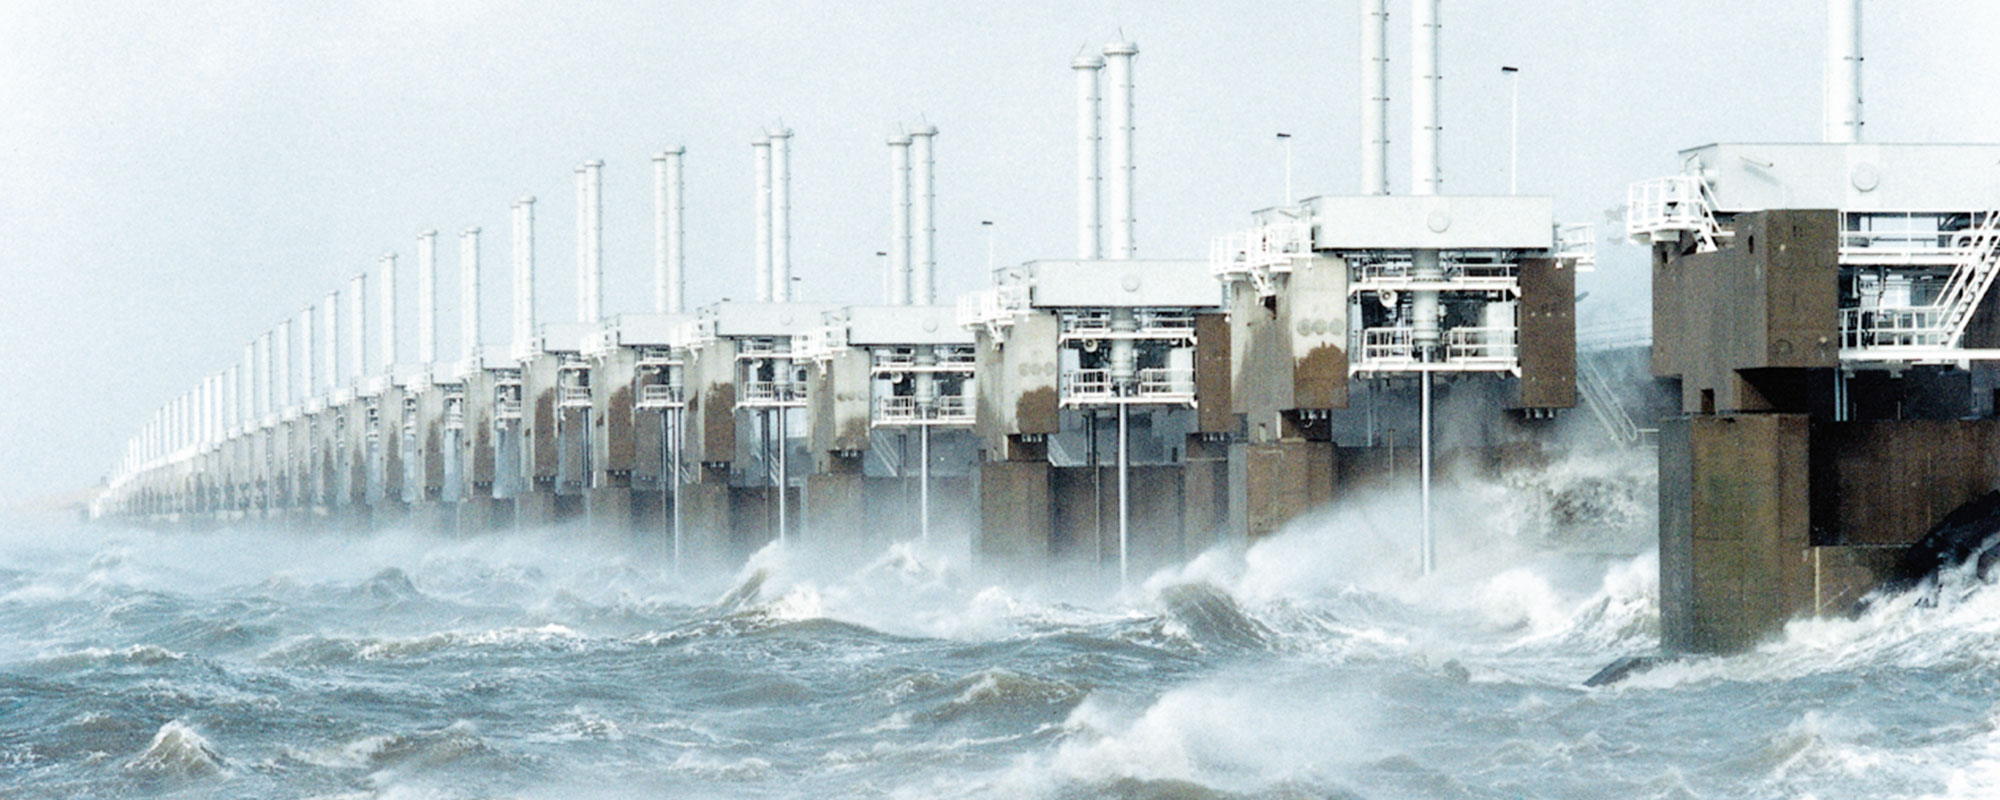 Dutch National Committee on Large Dams